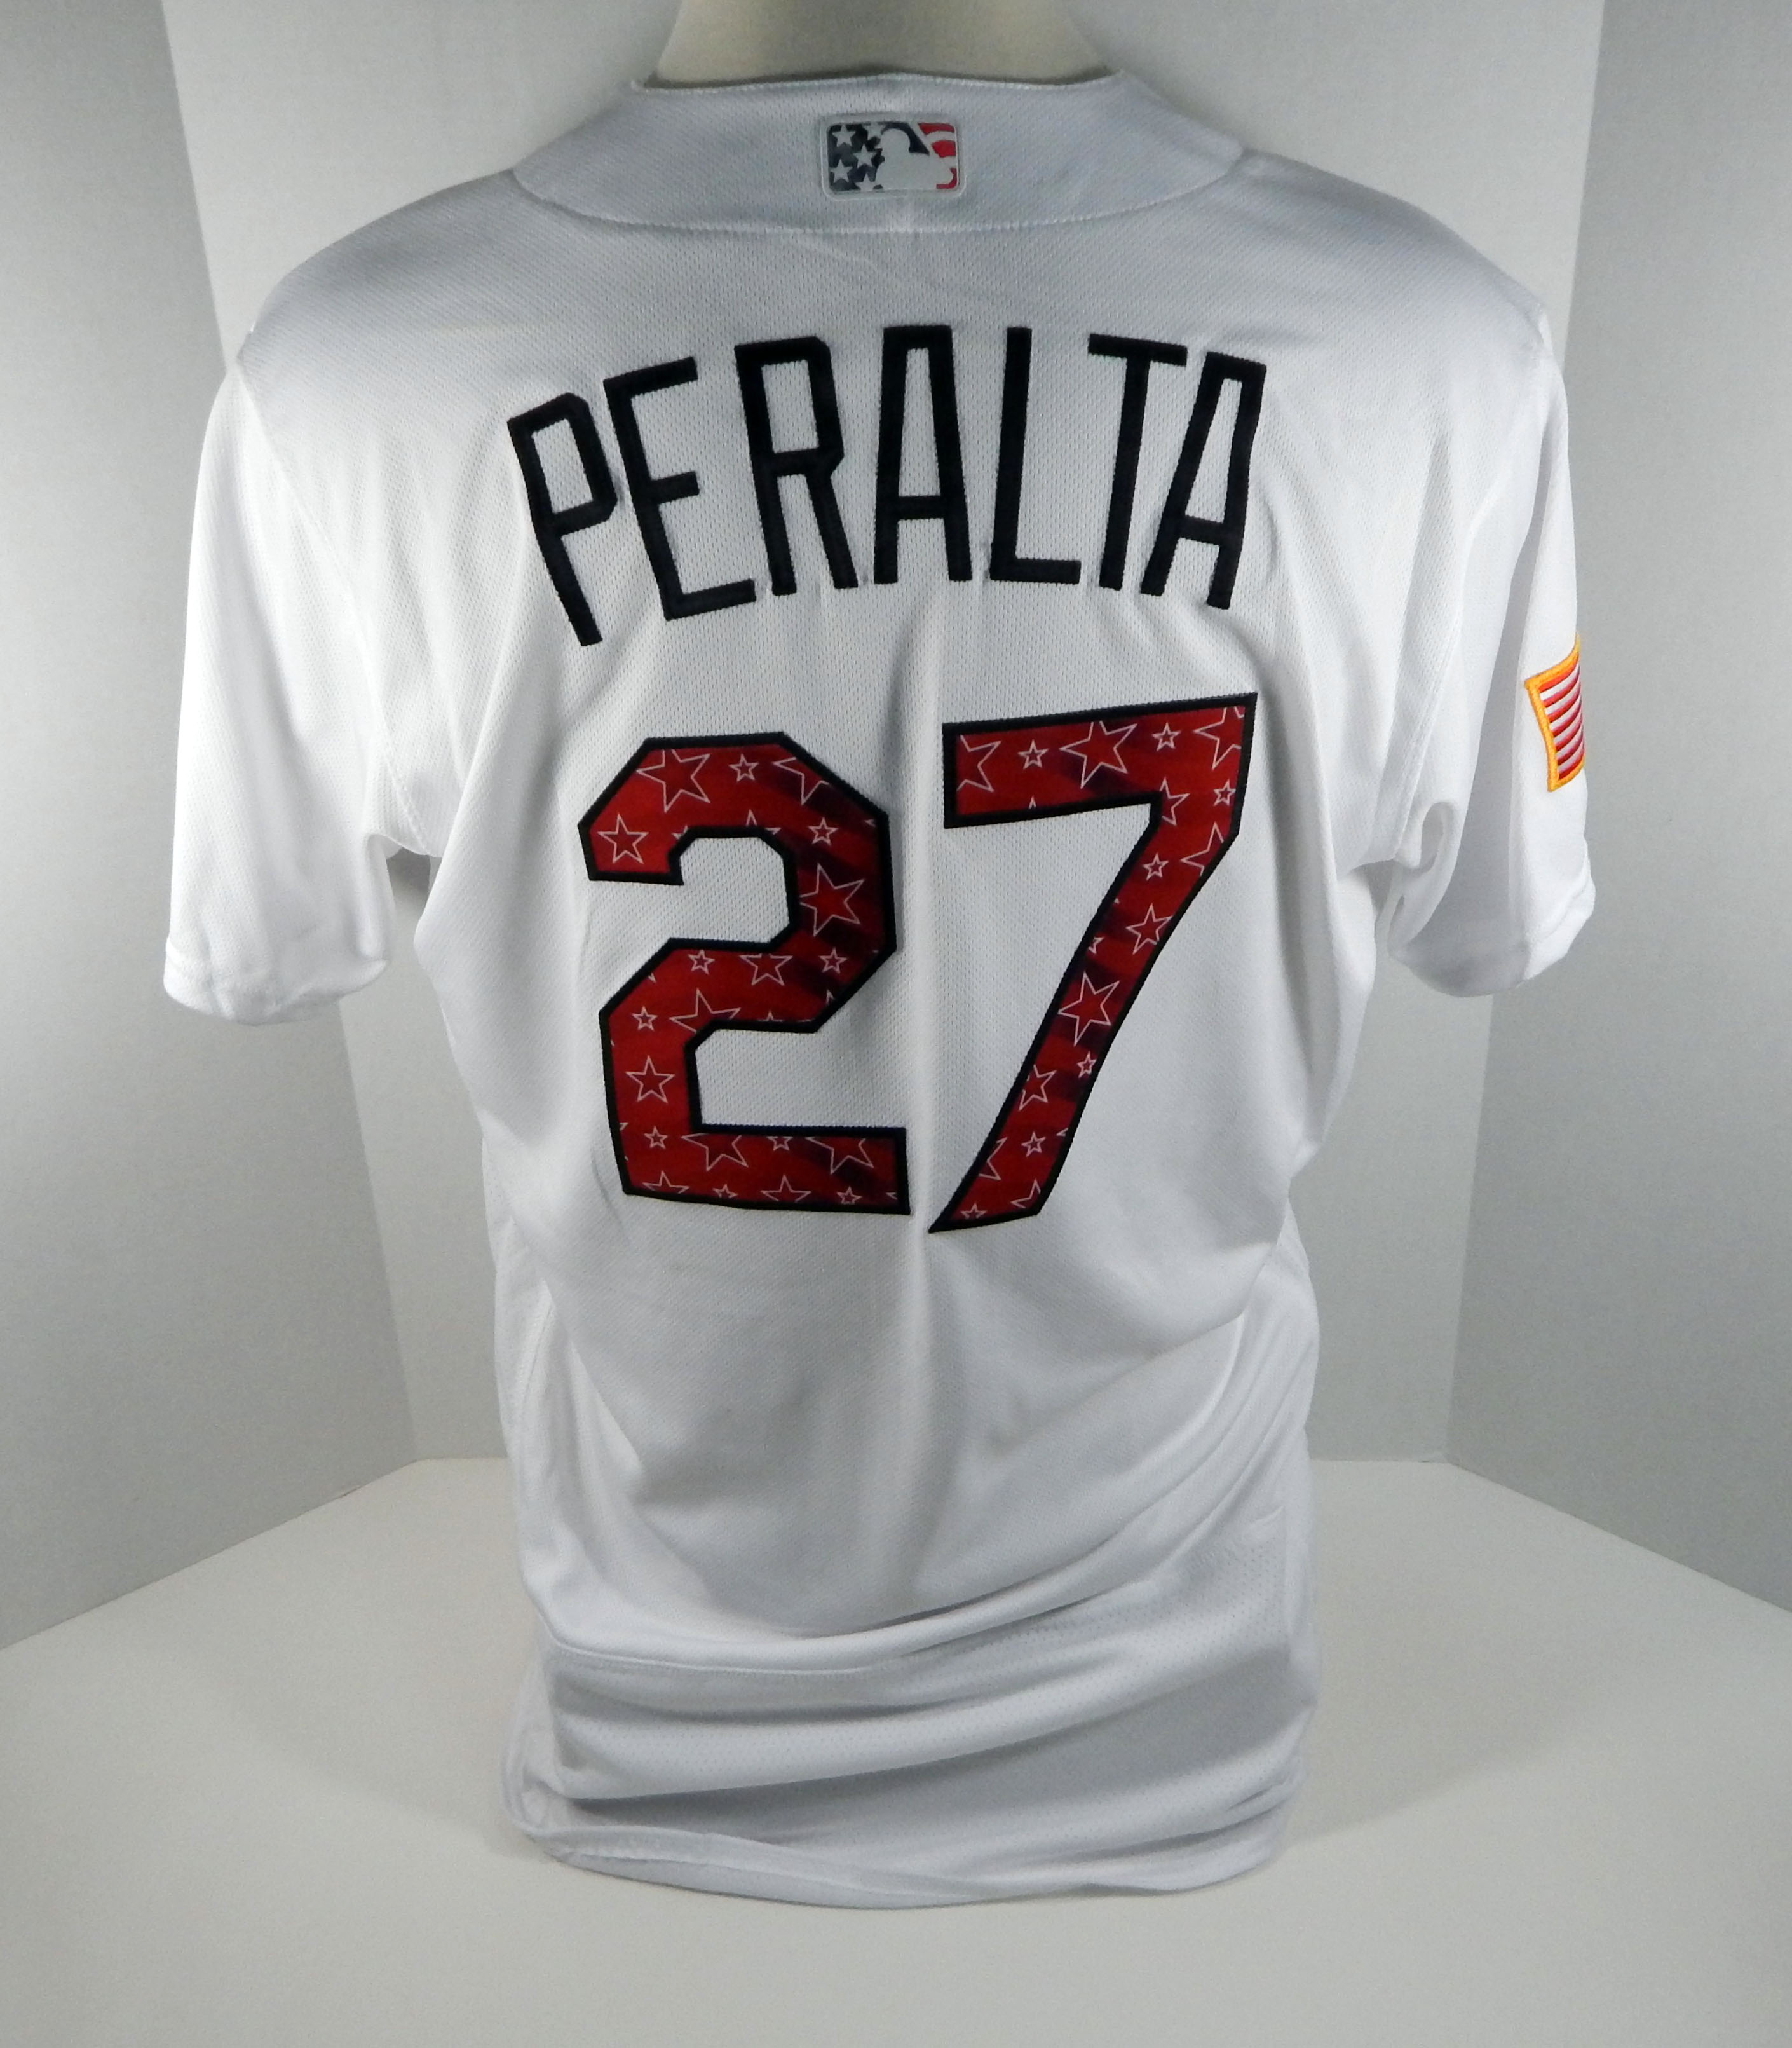 2017 St. Louis Cardinal Jhonny Peralta #27 Game Issued White Star Stripe Jersey | eBay